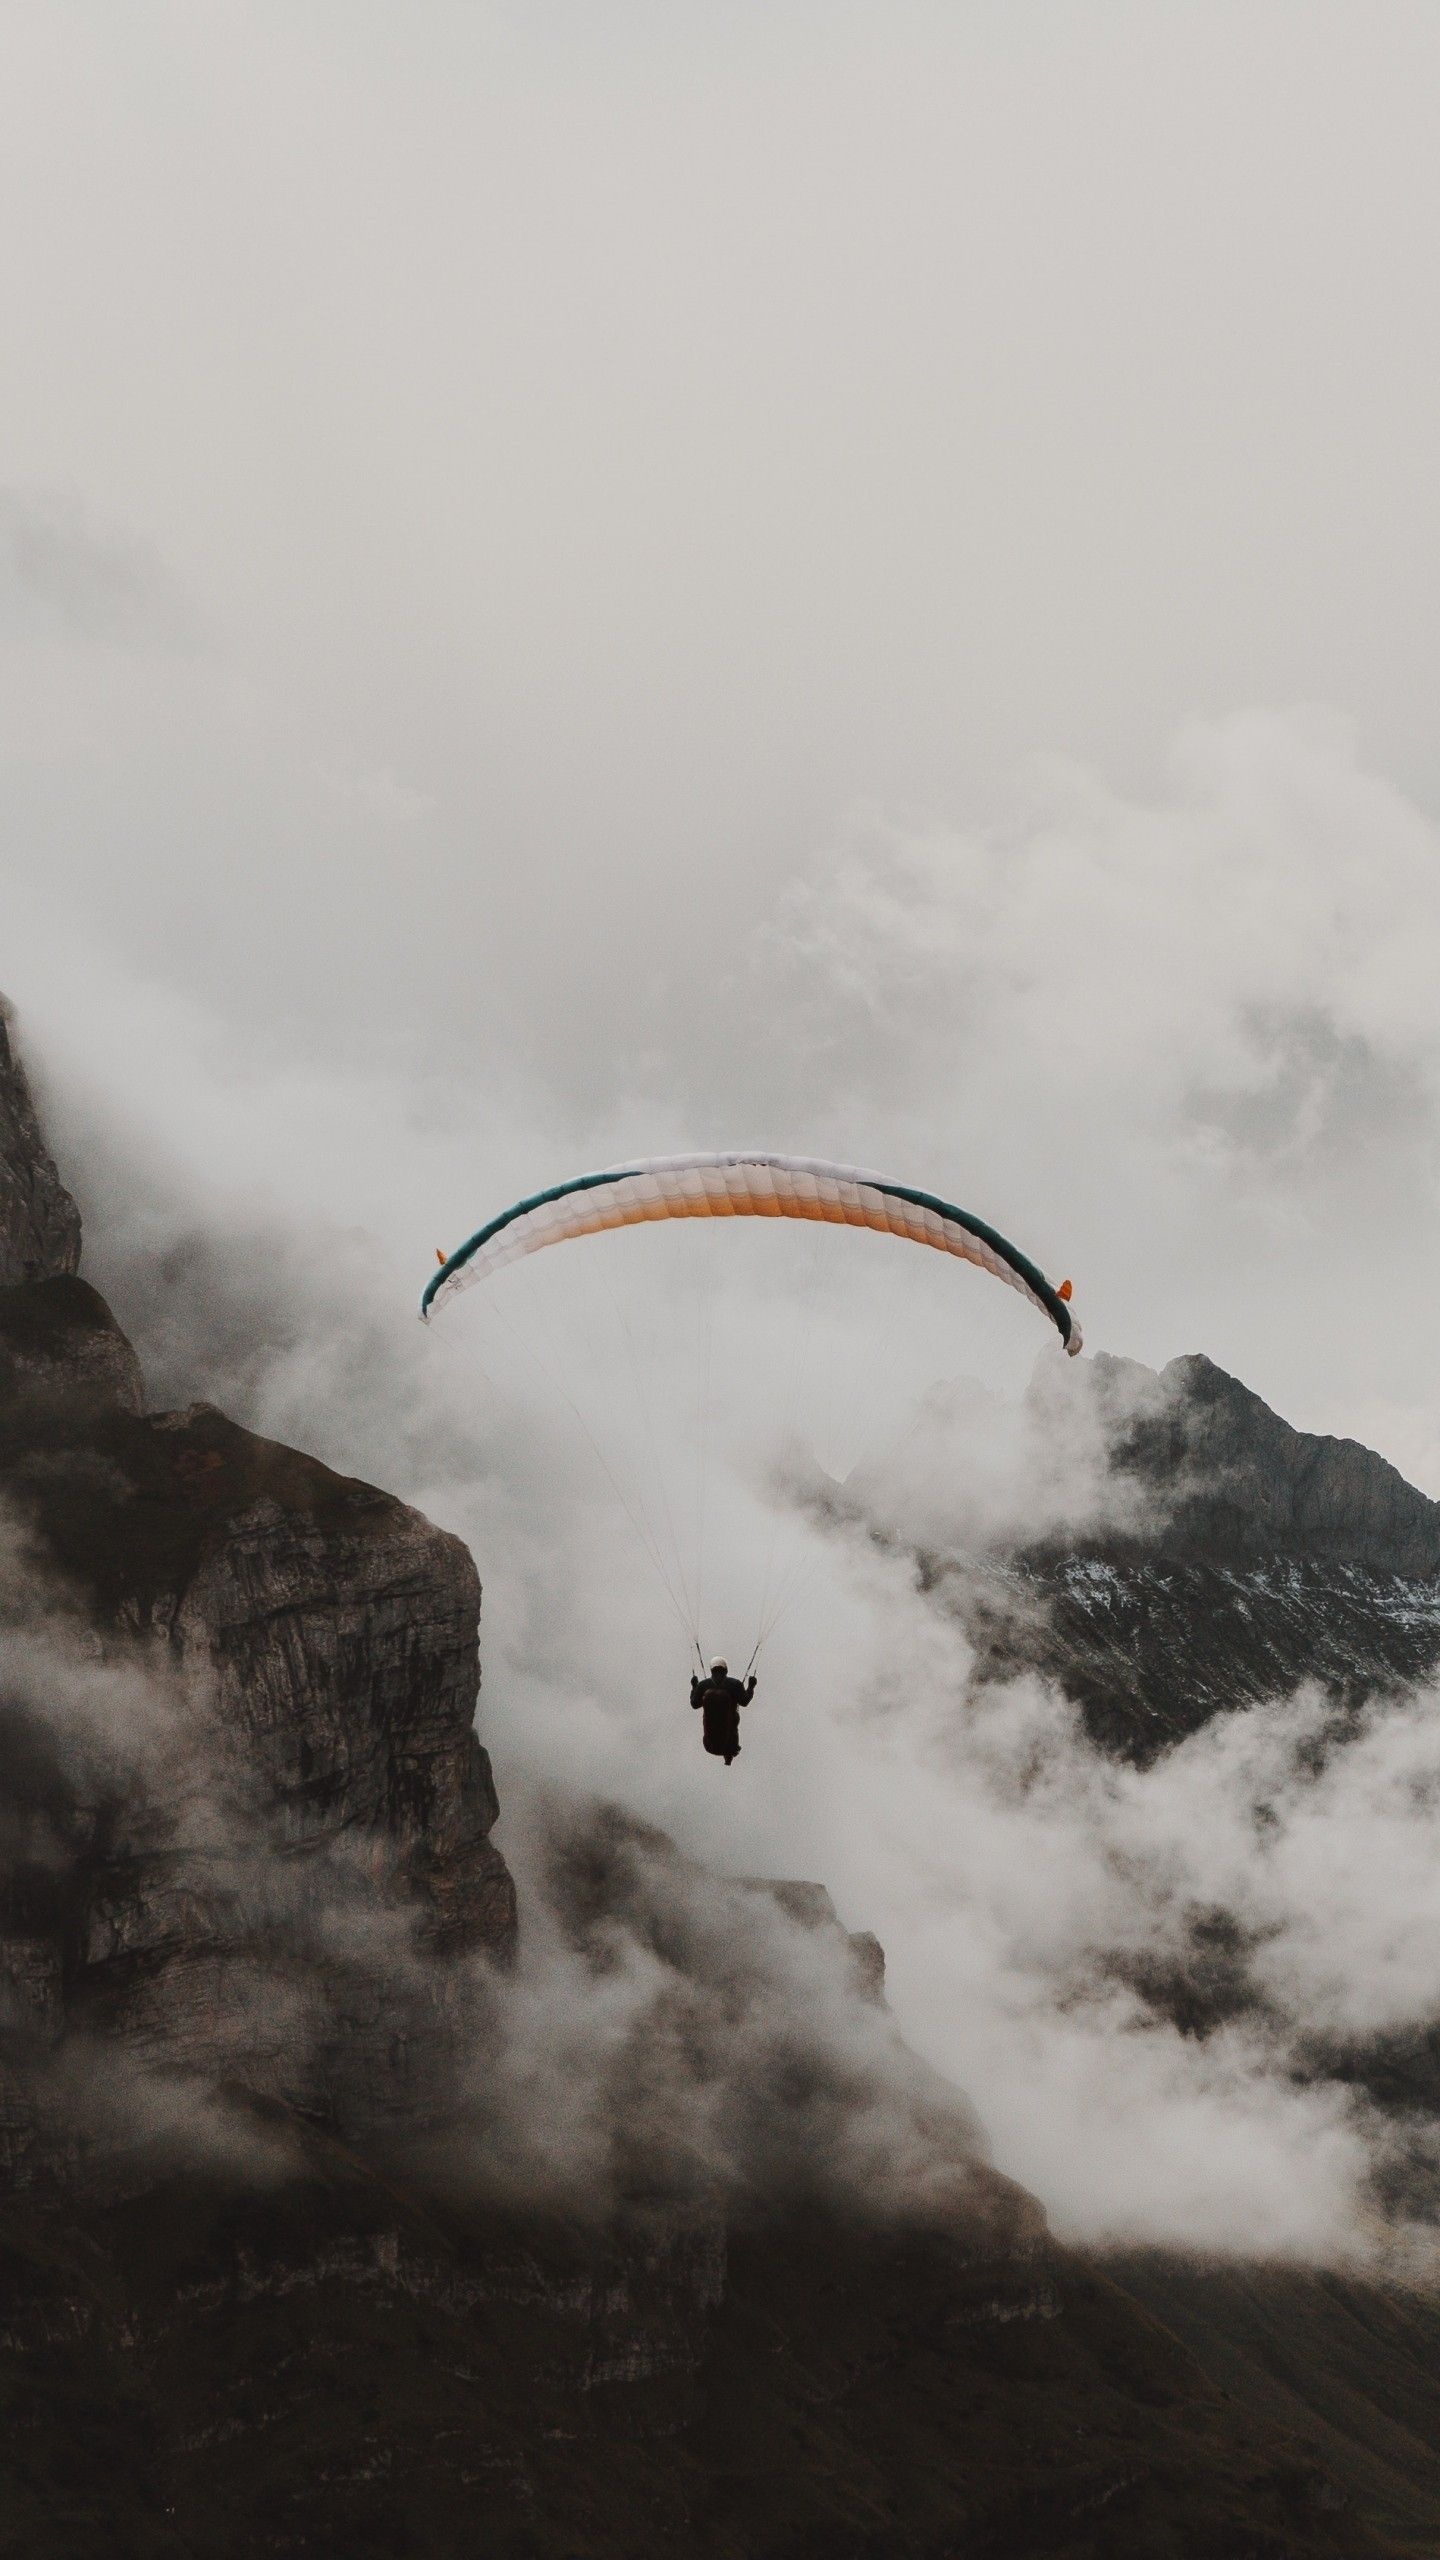 Paragliding: Paraglider Parachute Flying in the cloudy mountains, Altitudes of a few thousand meters. 1440x2560 HD Wallpaper.